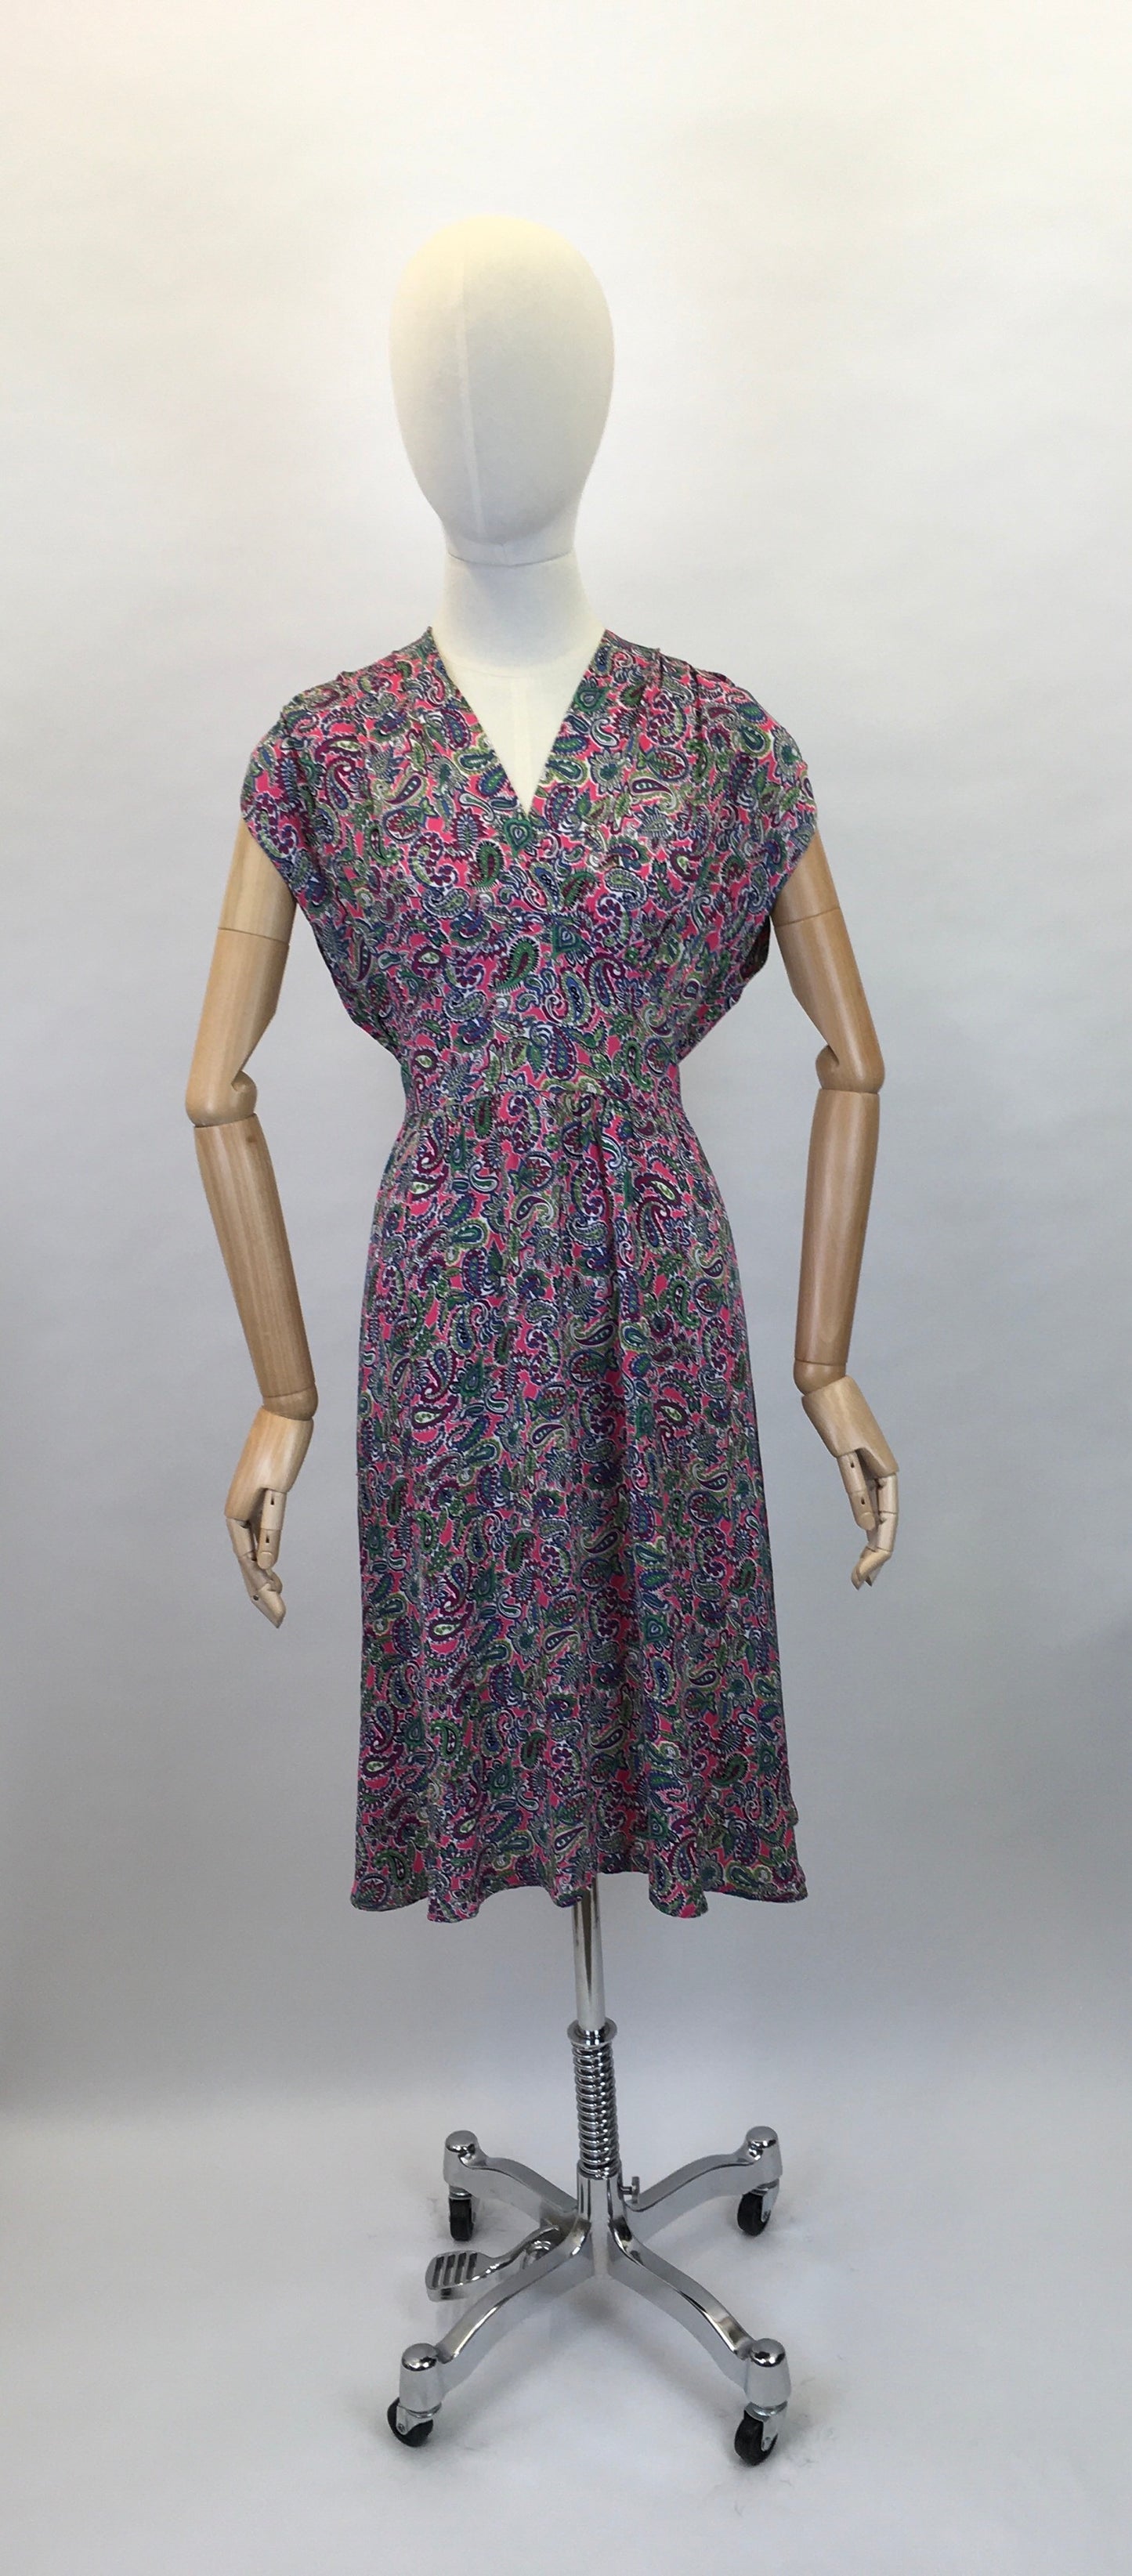 Original Late 1940s Day Dress - In a Beautiful Bright Paisley Rayon Crepe